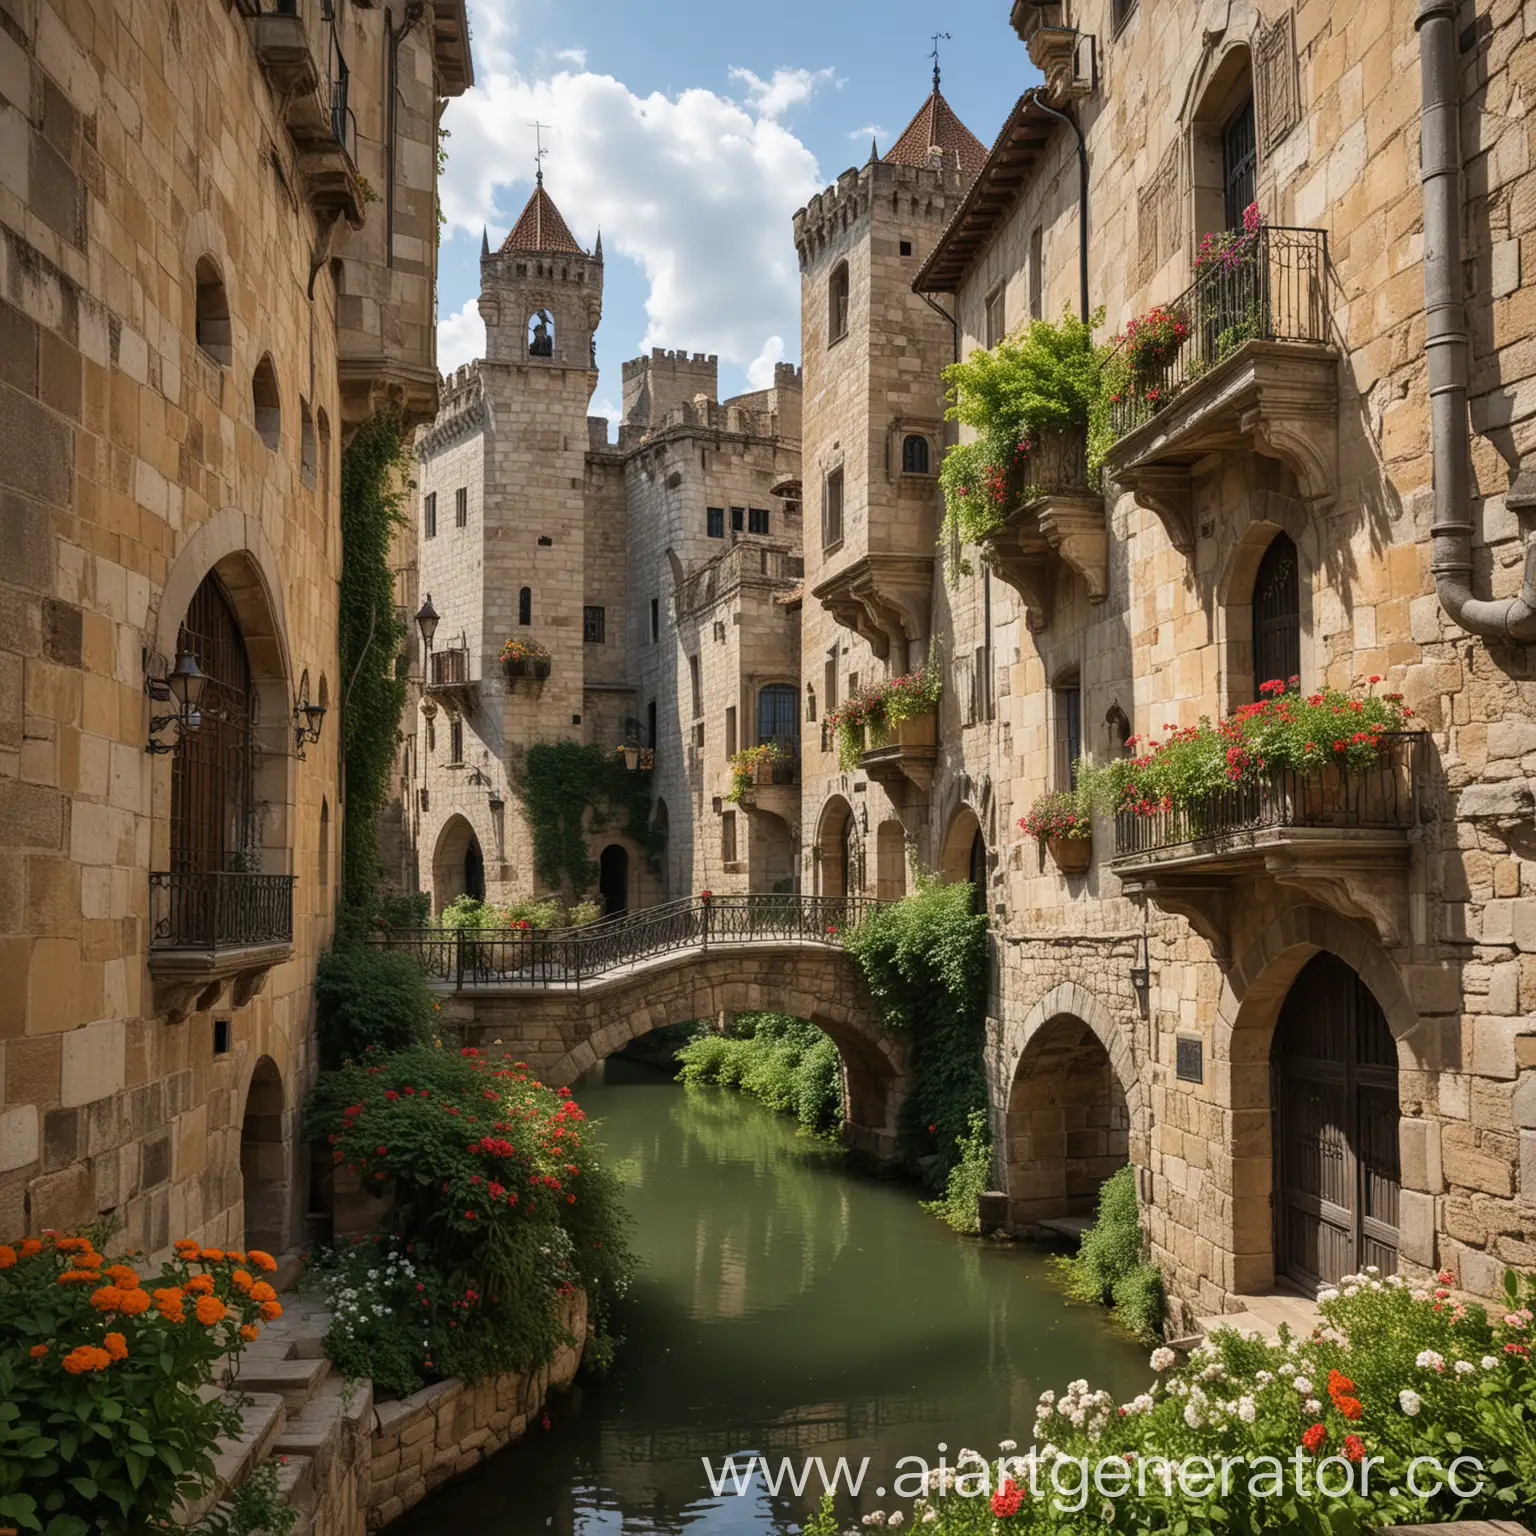 Enchanting-Carleon-Medieval-Fantasy-Cityscape-with-Gothic-Architecture-and-Lush-Gardens